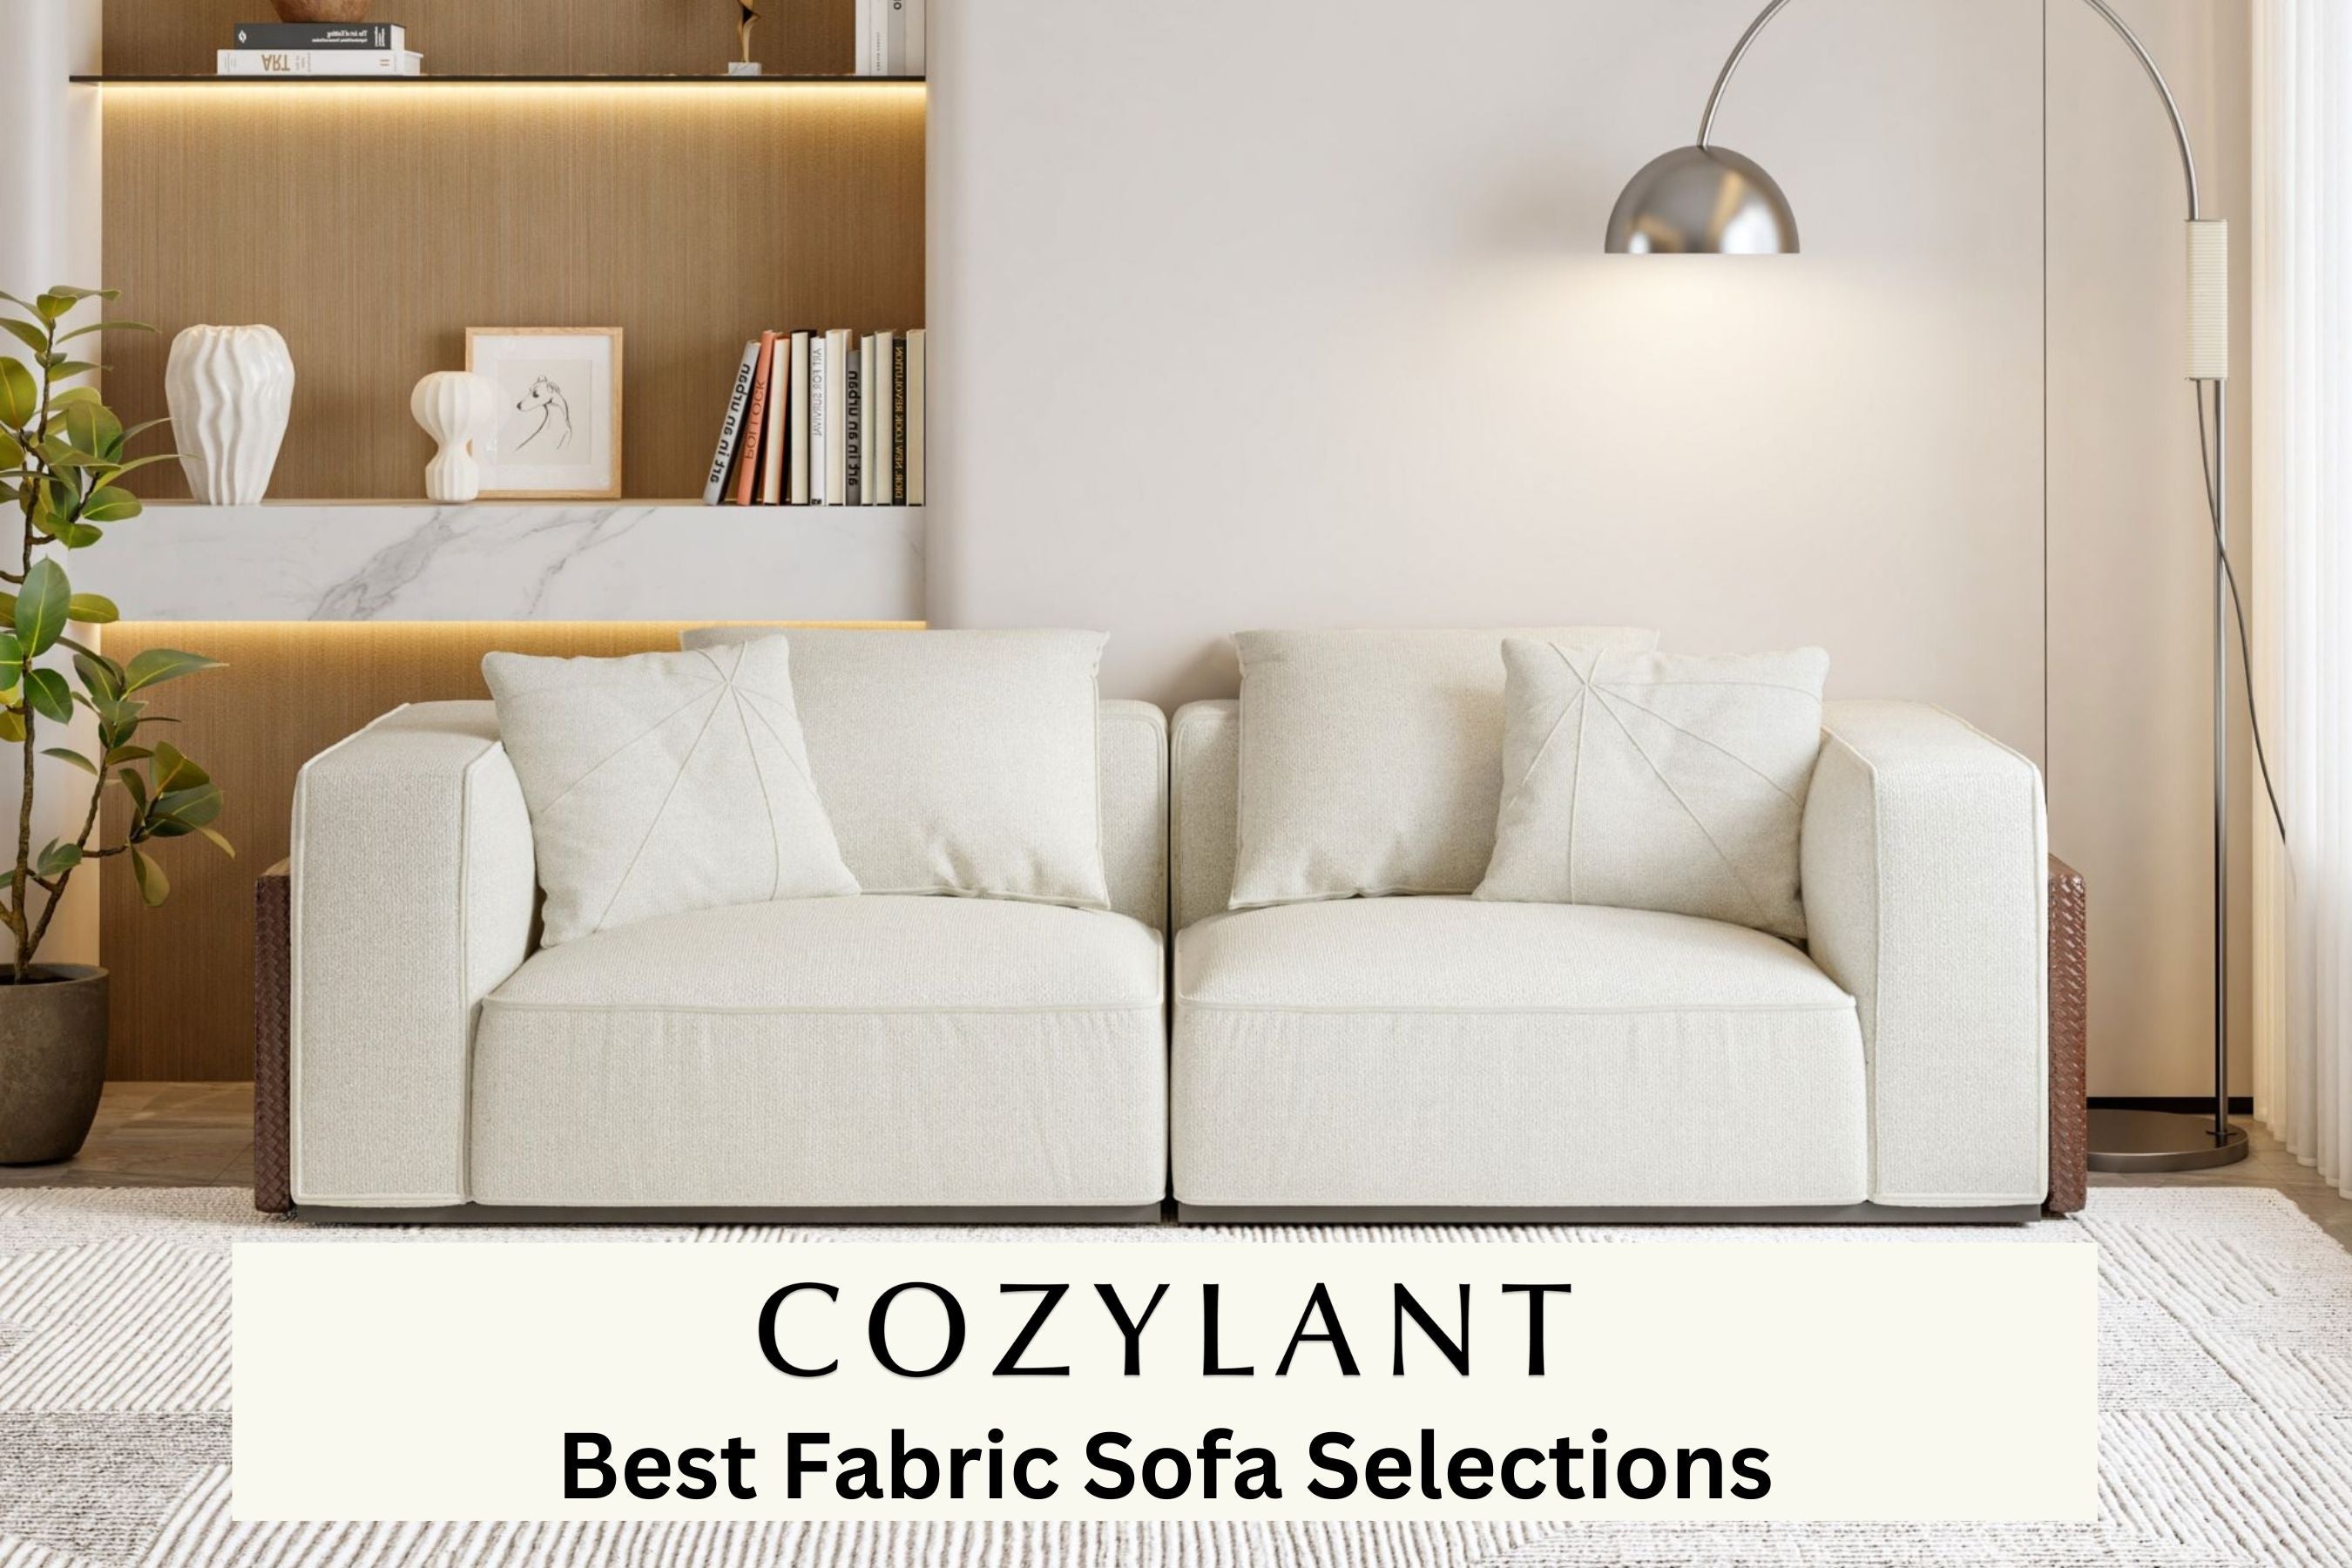 Cozylant's selection of best fabric sofas in Singapore